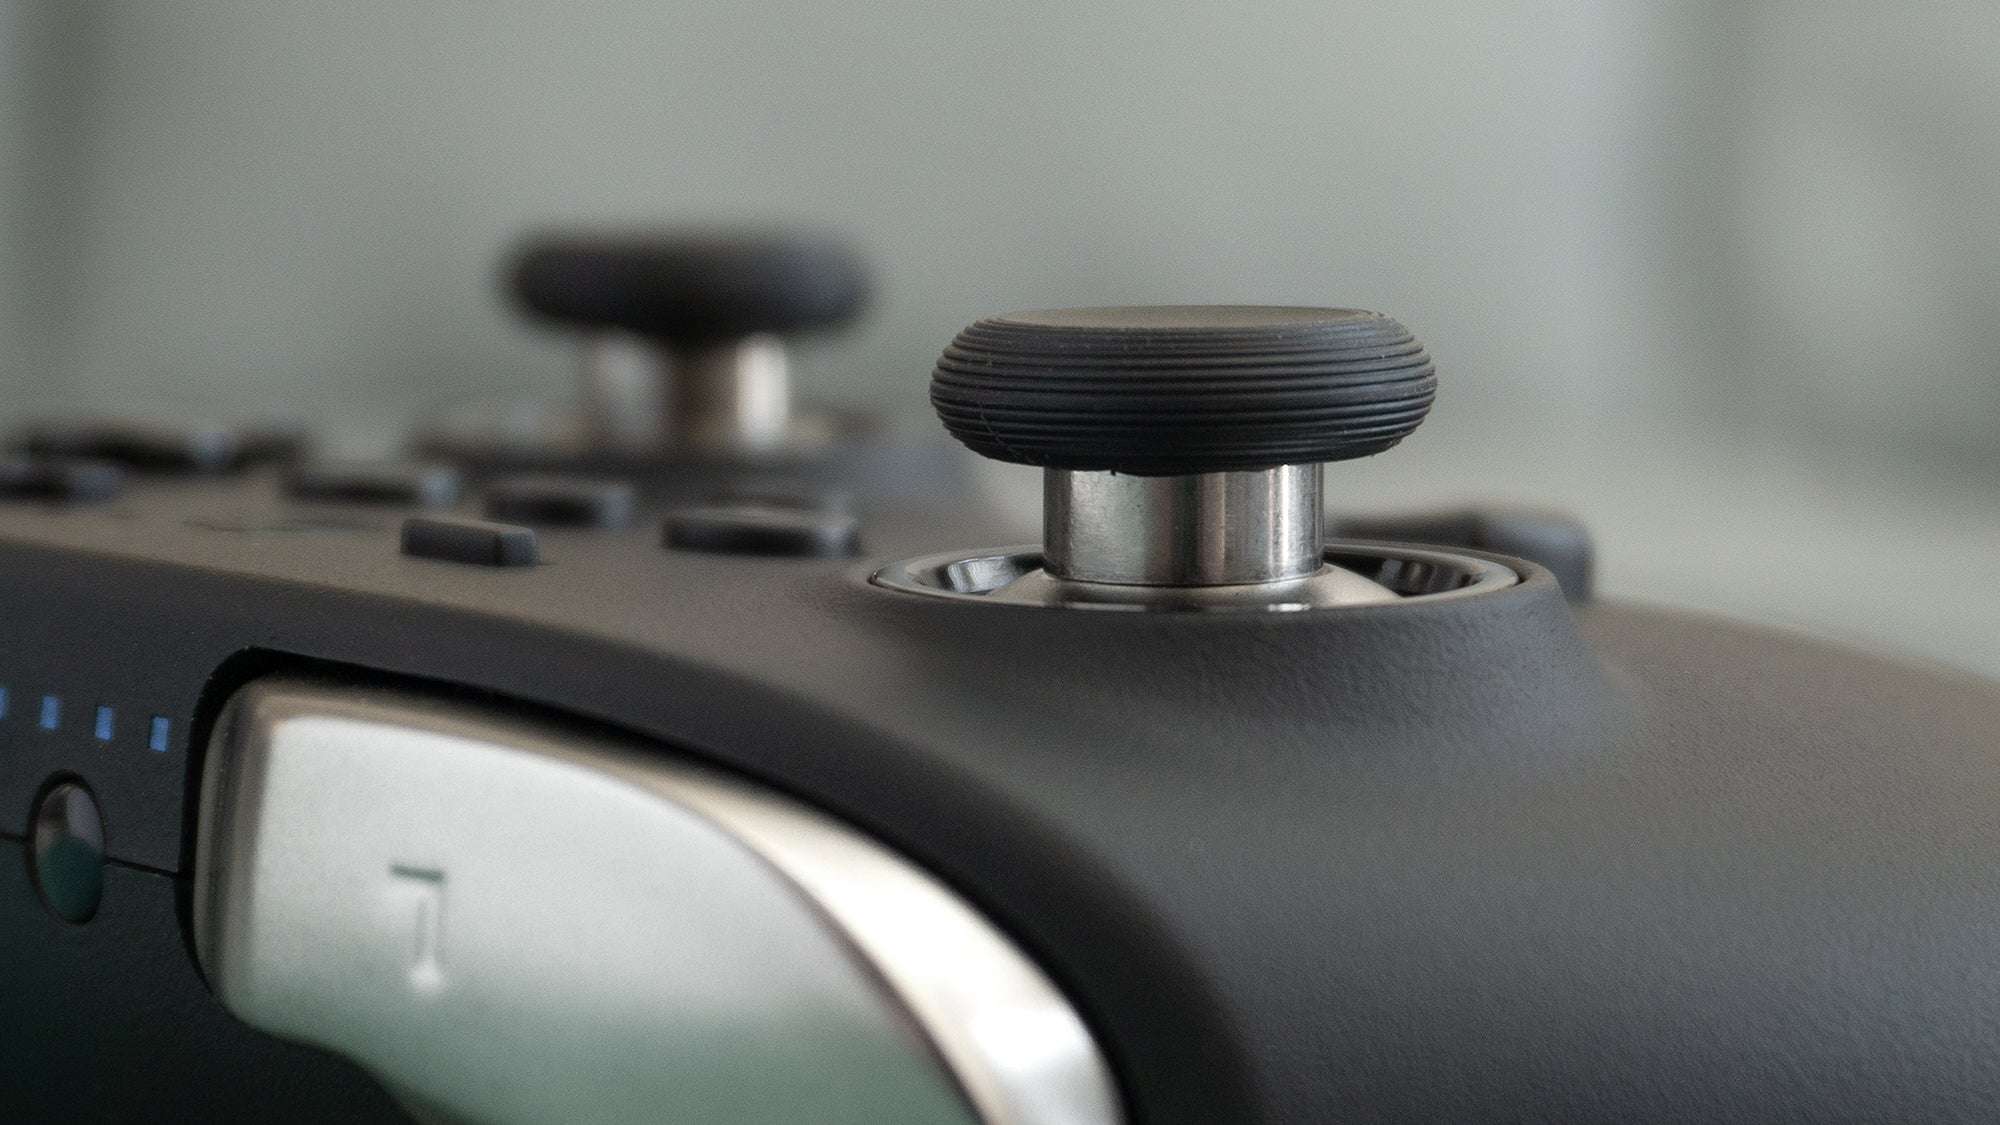 The joysticks feel like they do on another other control, but with metal components for added durabiliby. (Photo: Andrew Liszewski - Gizmodo)